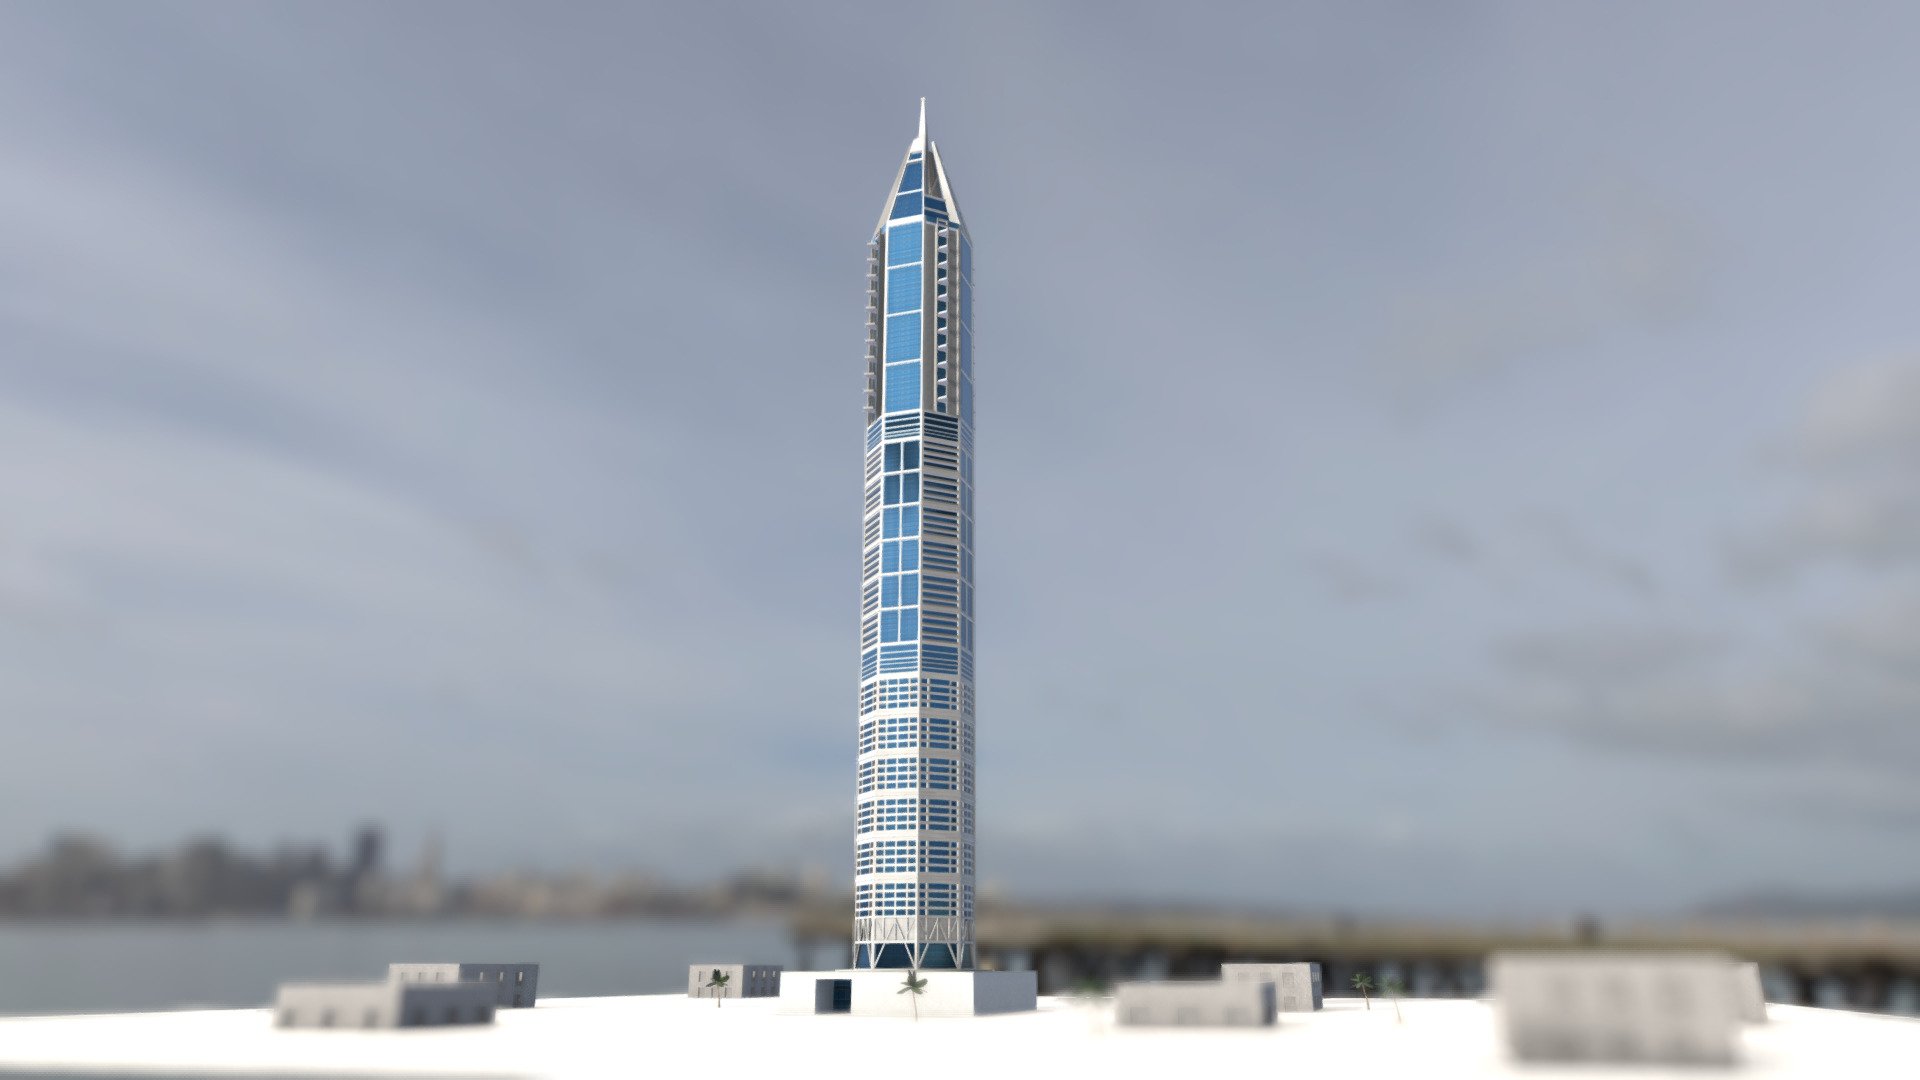 23 Marina Tower is skyscraper located in Dubai, United Emirates Arab. Low Poly 3D model ready for Augmented Reality, Virtual Reality and Video Games. PBR Textures with 2K resolution. Modeling in Blender and textured with Substance Painter.

If you need some modification for this 3d model just contact us or email to cuankiproduction@gmail.com. Hope you like this 3d model. Thank you! - 23 Marina Tower - Buy Royalty Free 3D model by cuankiproduction 3d model